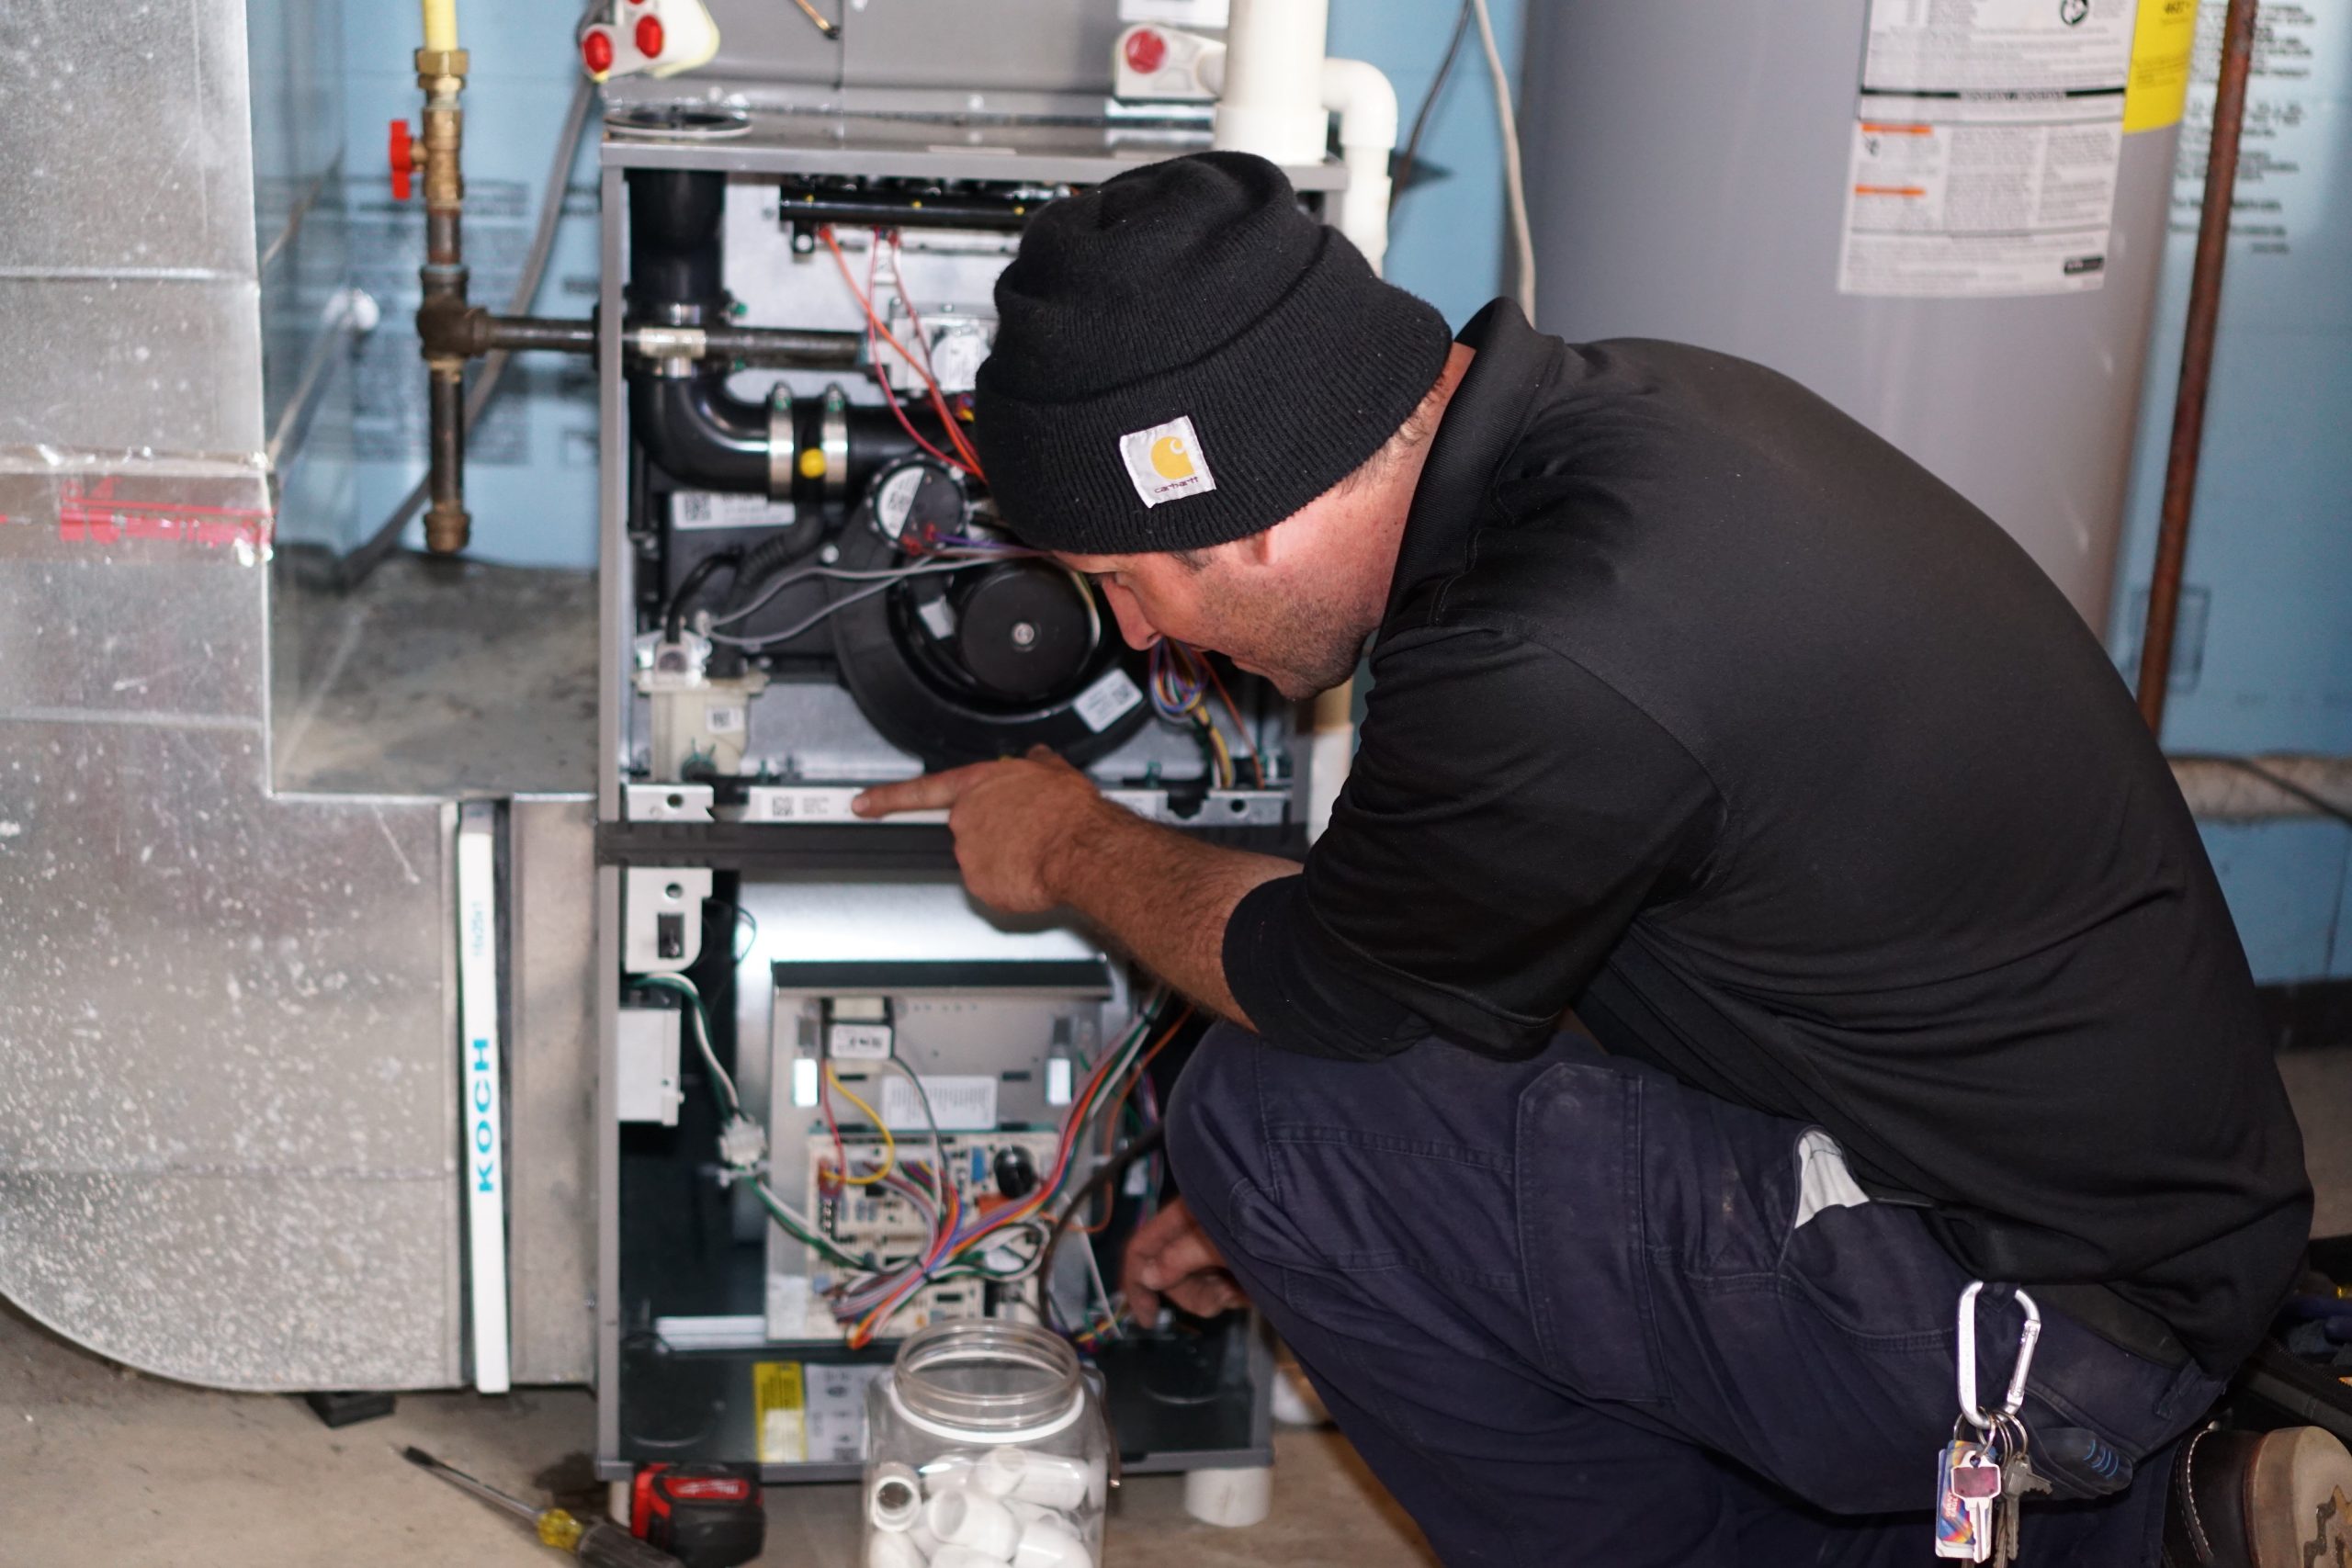 Furnace Replacement: Cost and When to Do It